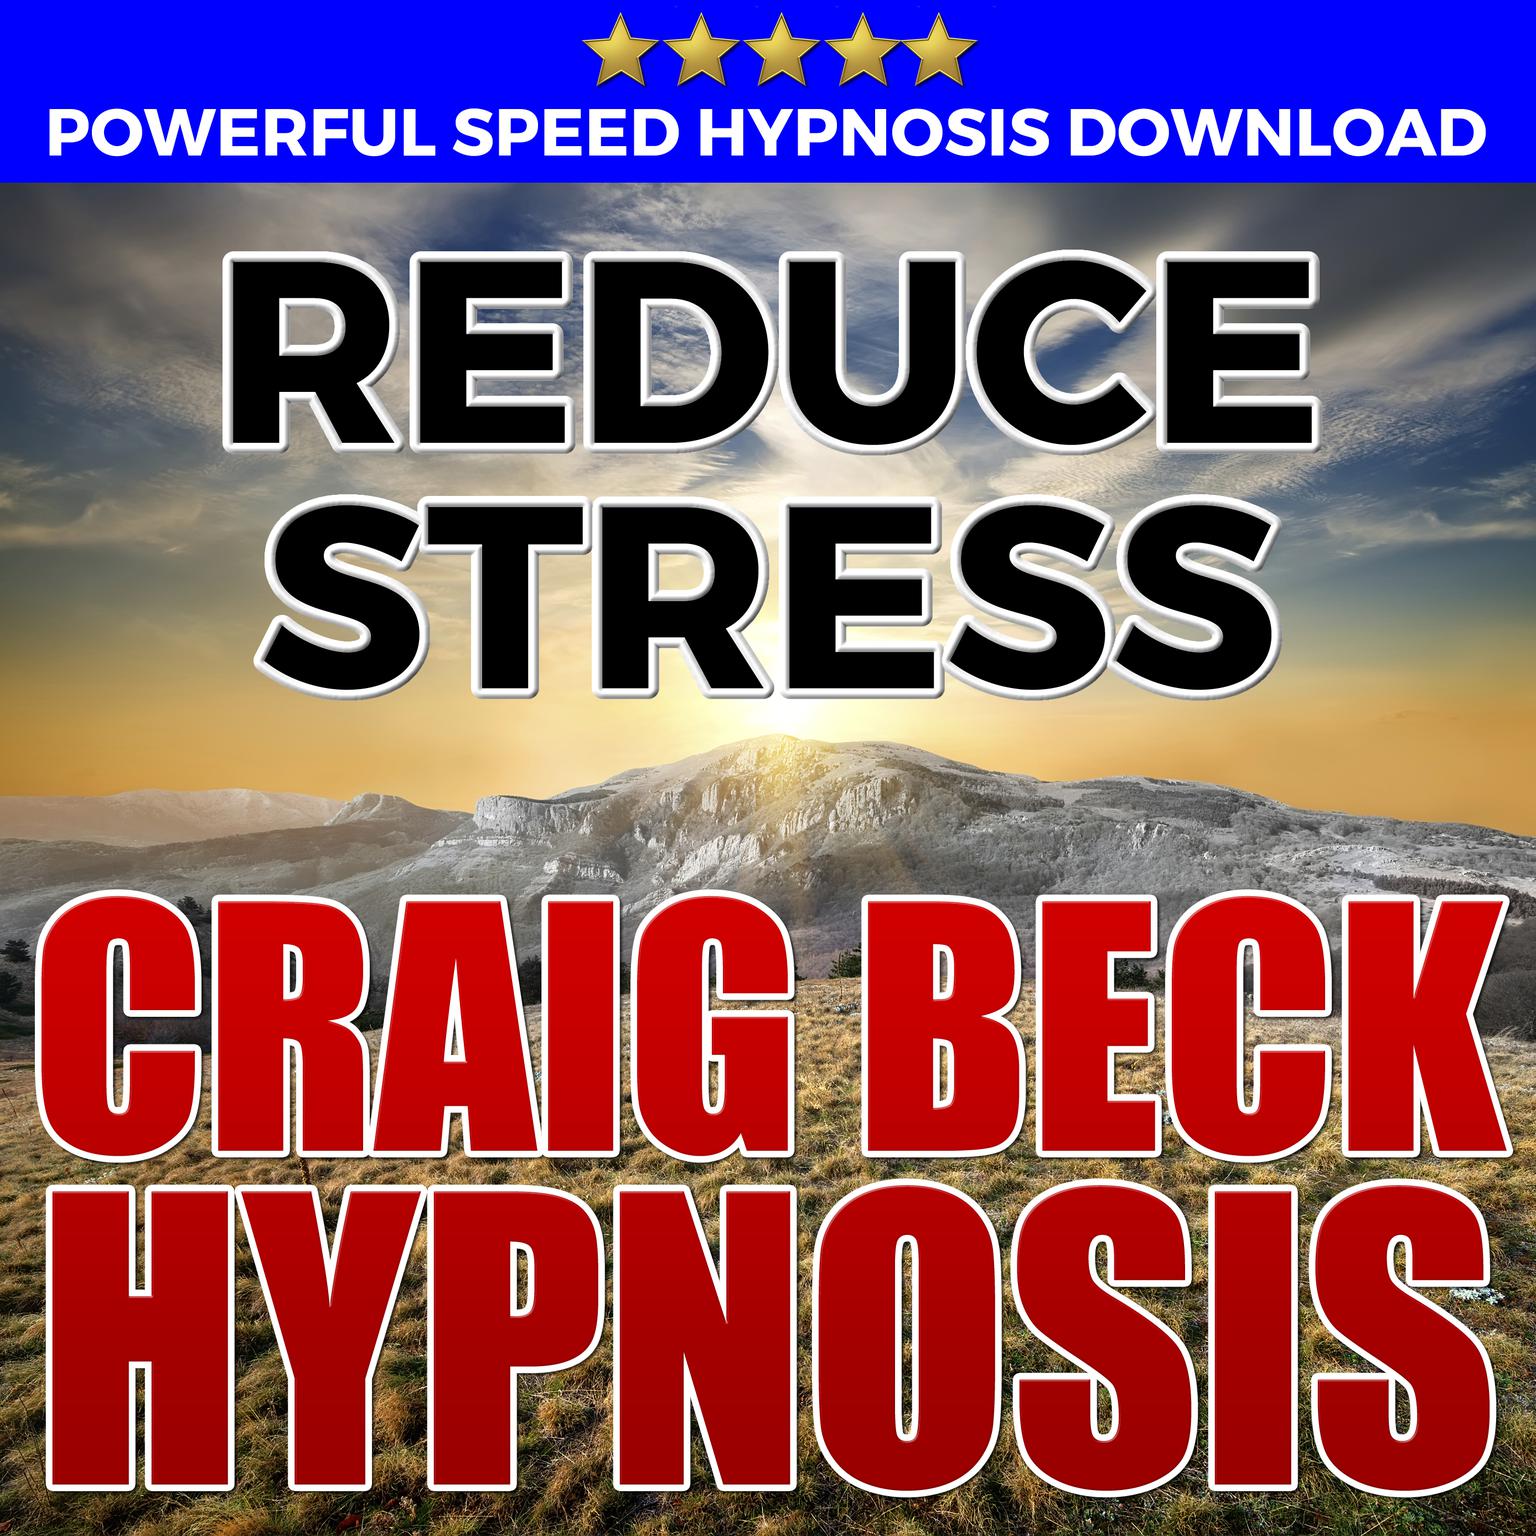 Reduce Stress: Hypnosis Downloads Audiobook, by Craig Beck